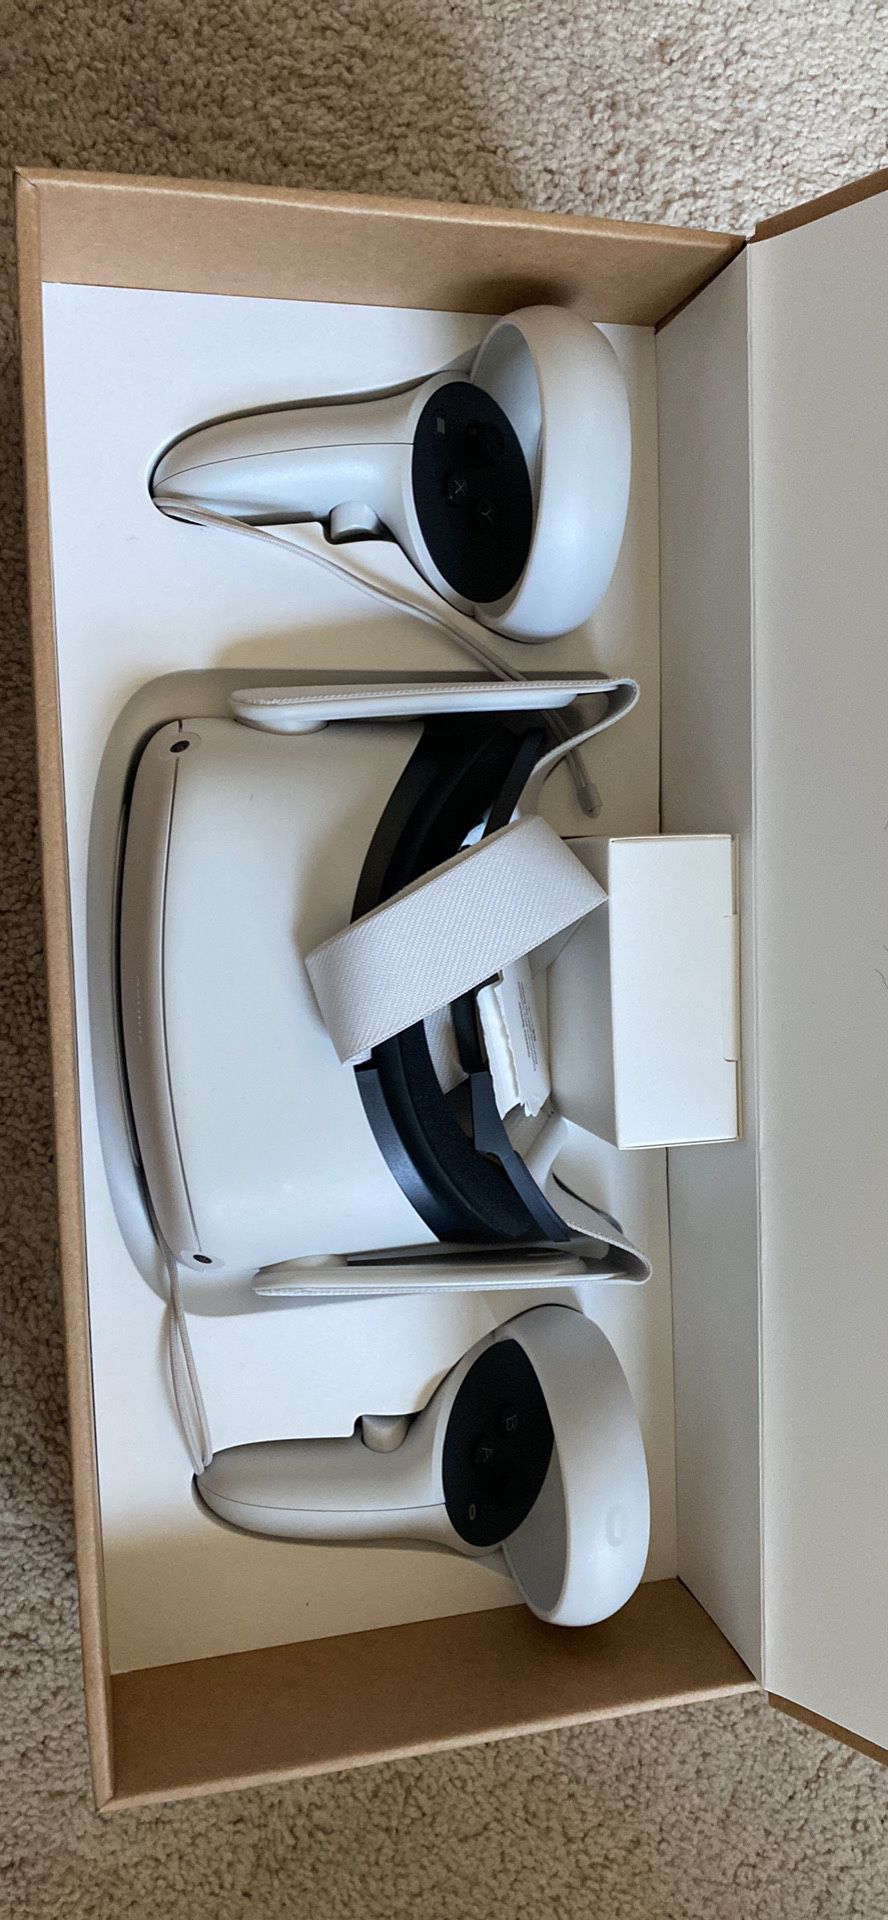 Oculus Quest 2: Advanced All-In-One Virtual Reality Headset - 256GB